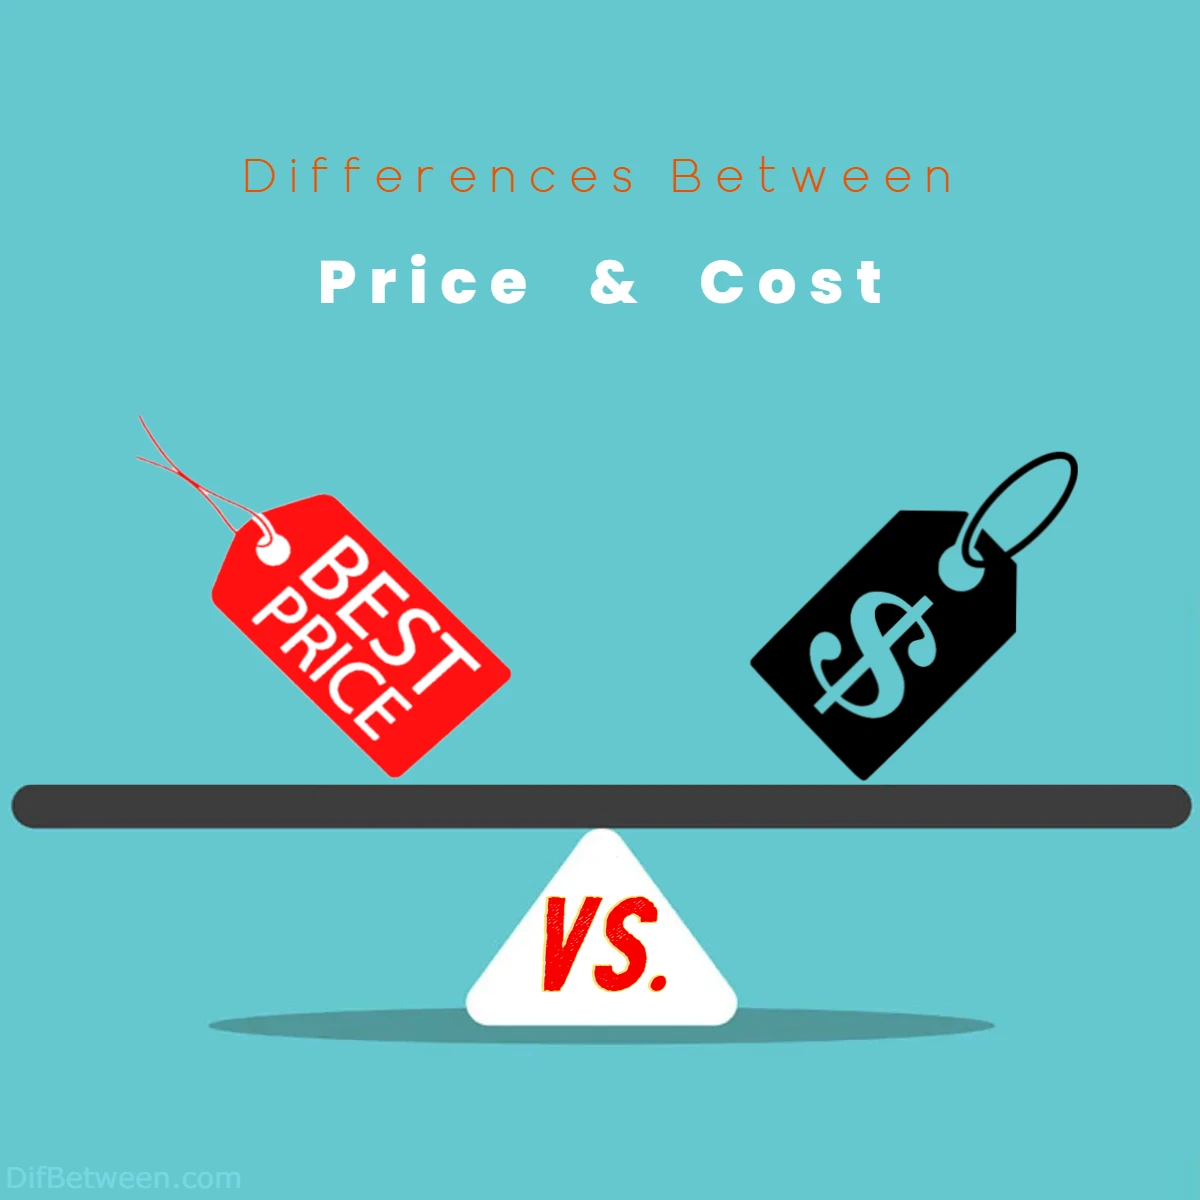 Differences Between Price vs Cost